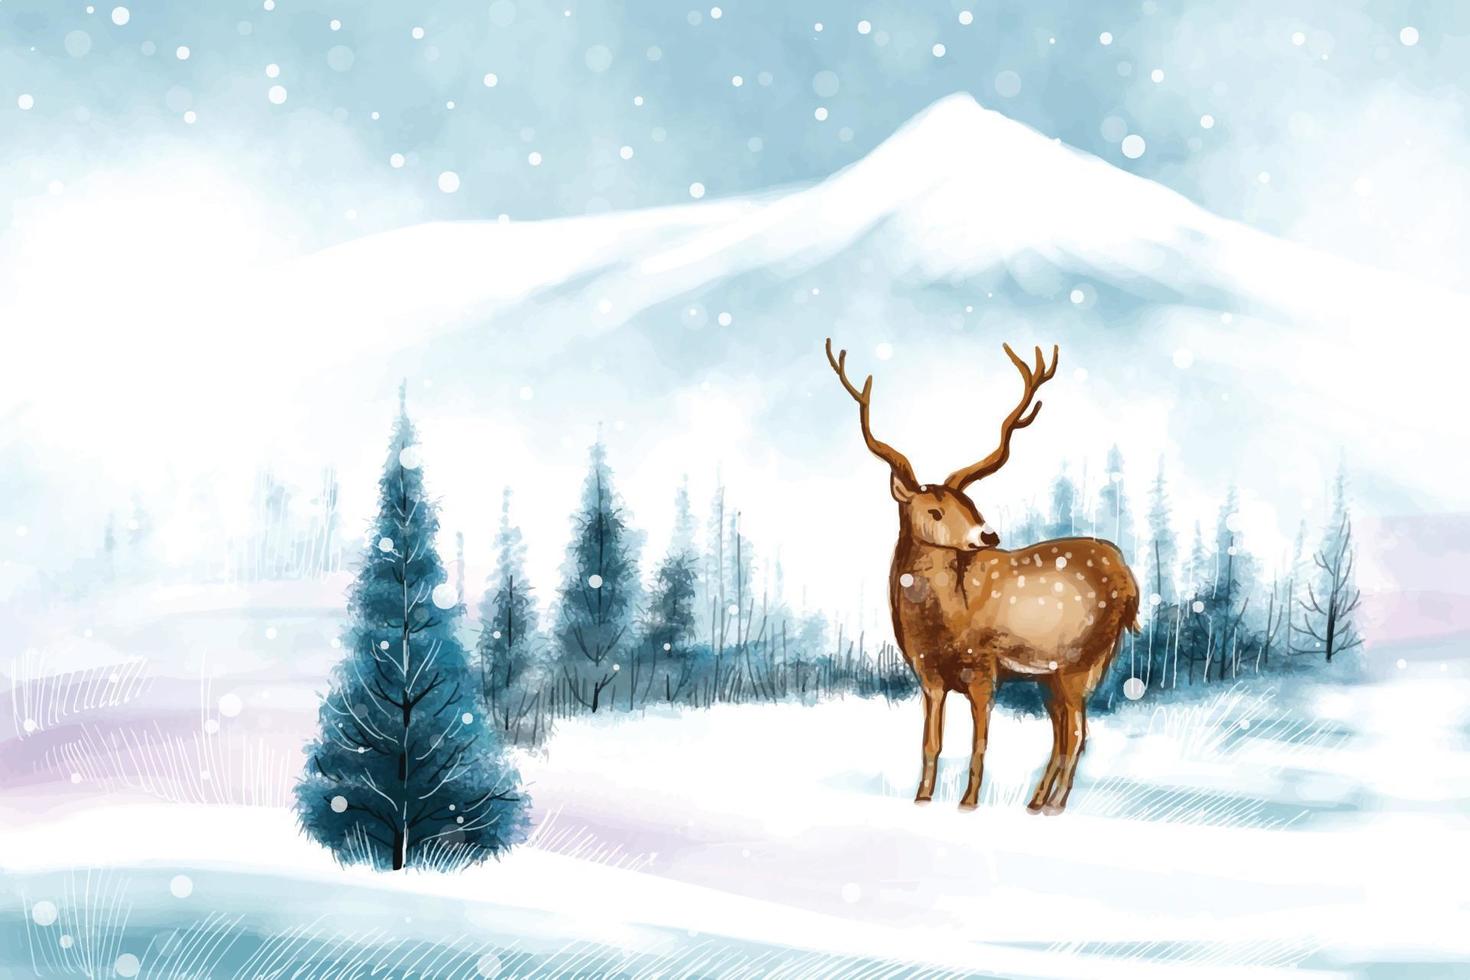 New year and christmas tree winter landscape background with reindeer vector